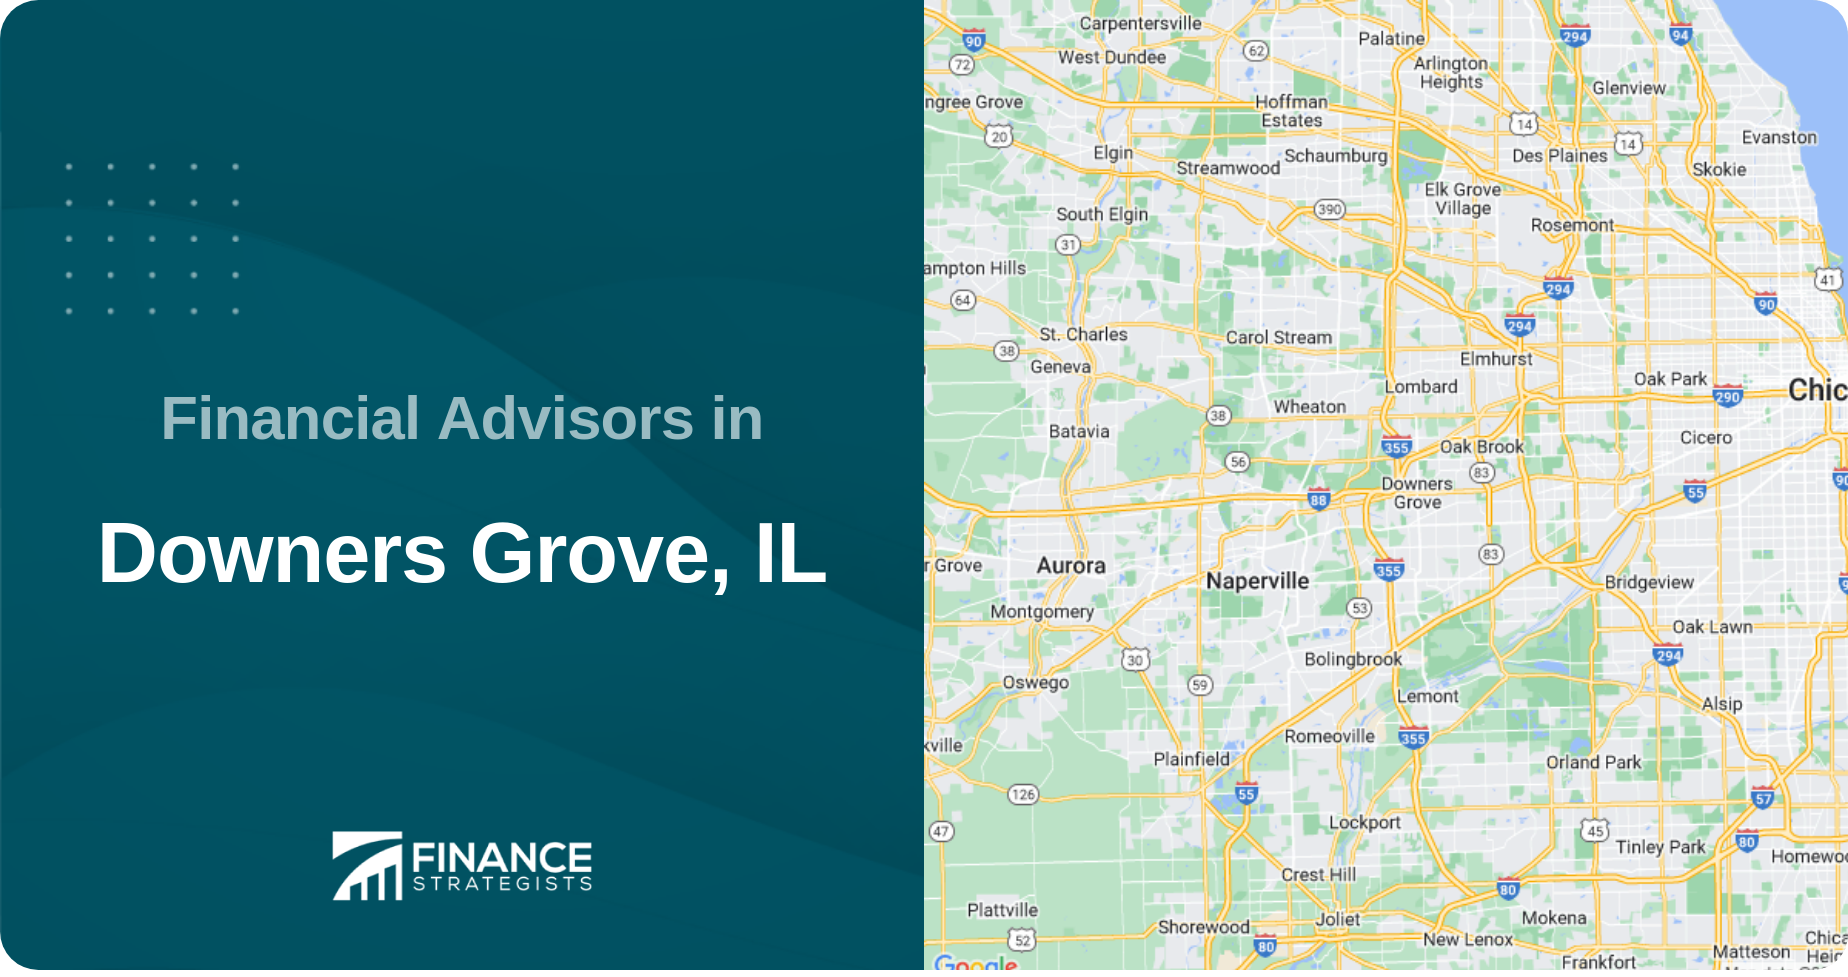 Financial Advisors in Downers Grove, IL